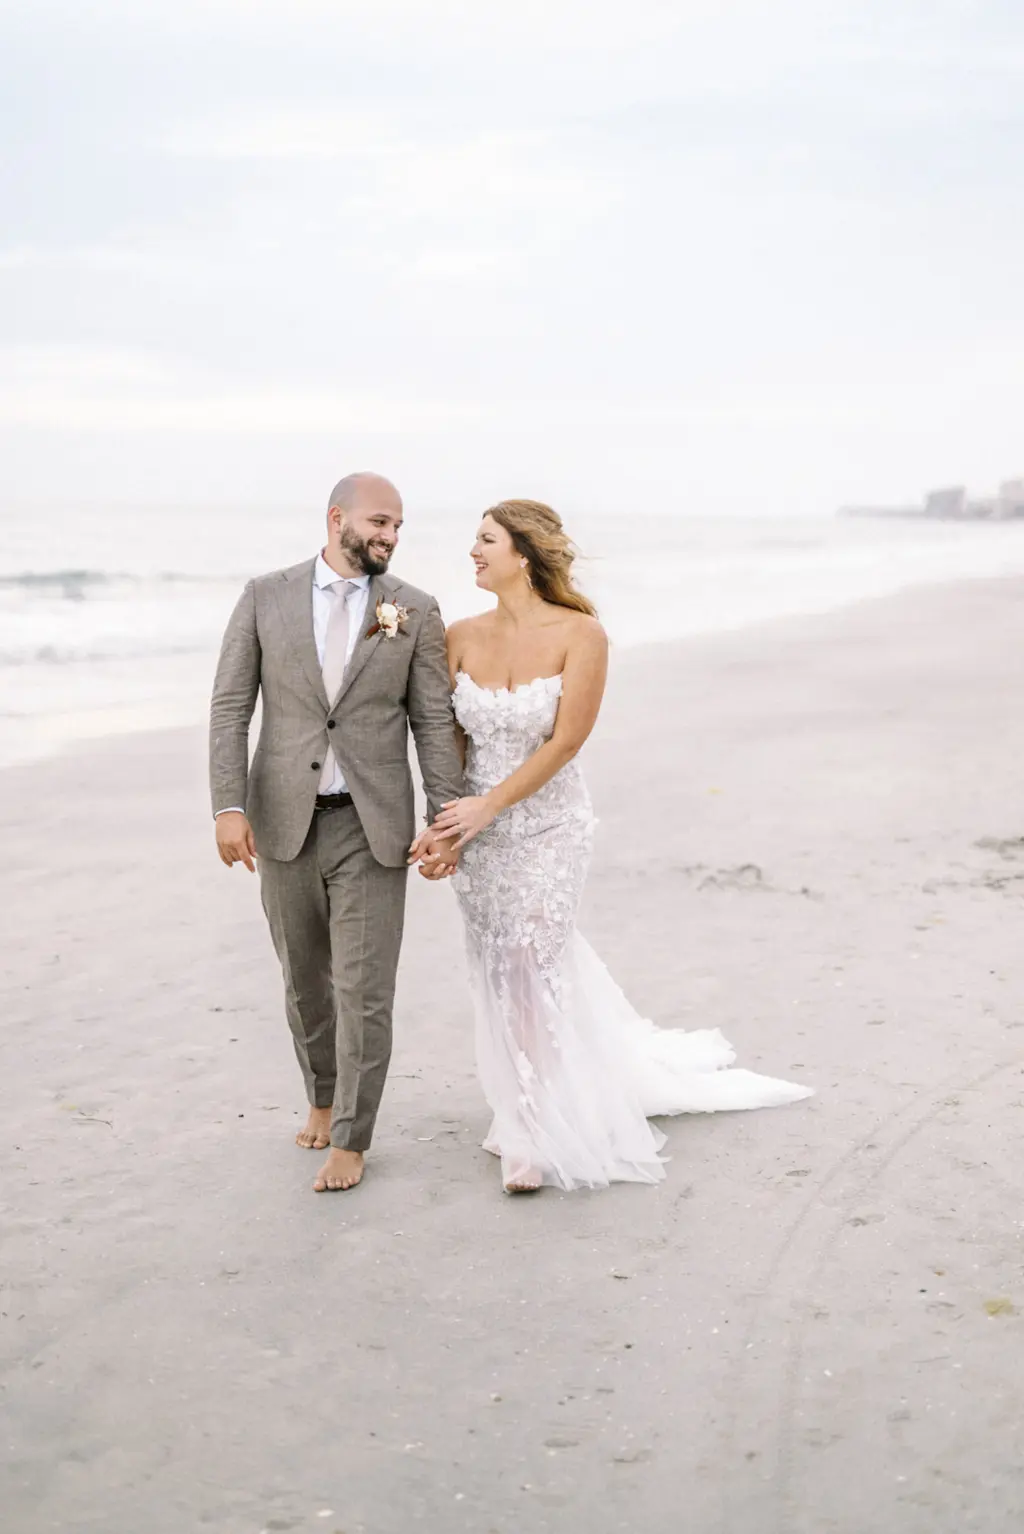 Bride and Groom Beach Wedding Portrait Inspiration | Dany Tabet Strapless Lace Floral Fit and Flare Tulle Bridal Gown